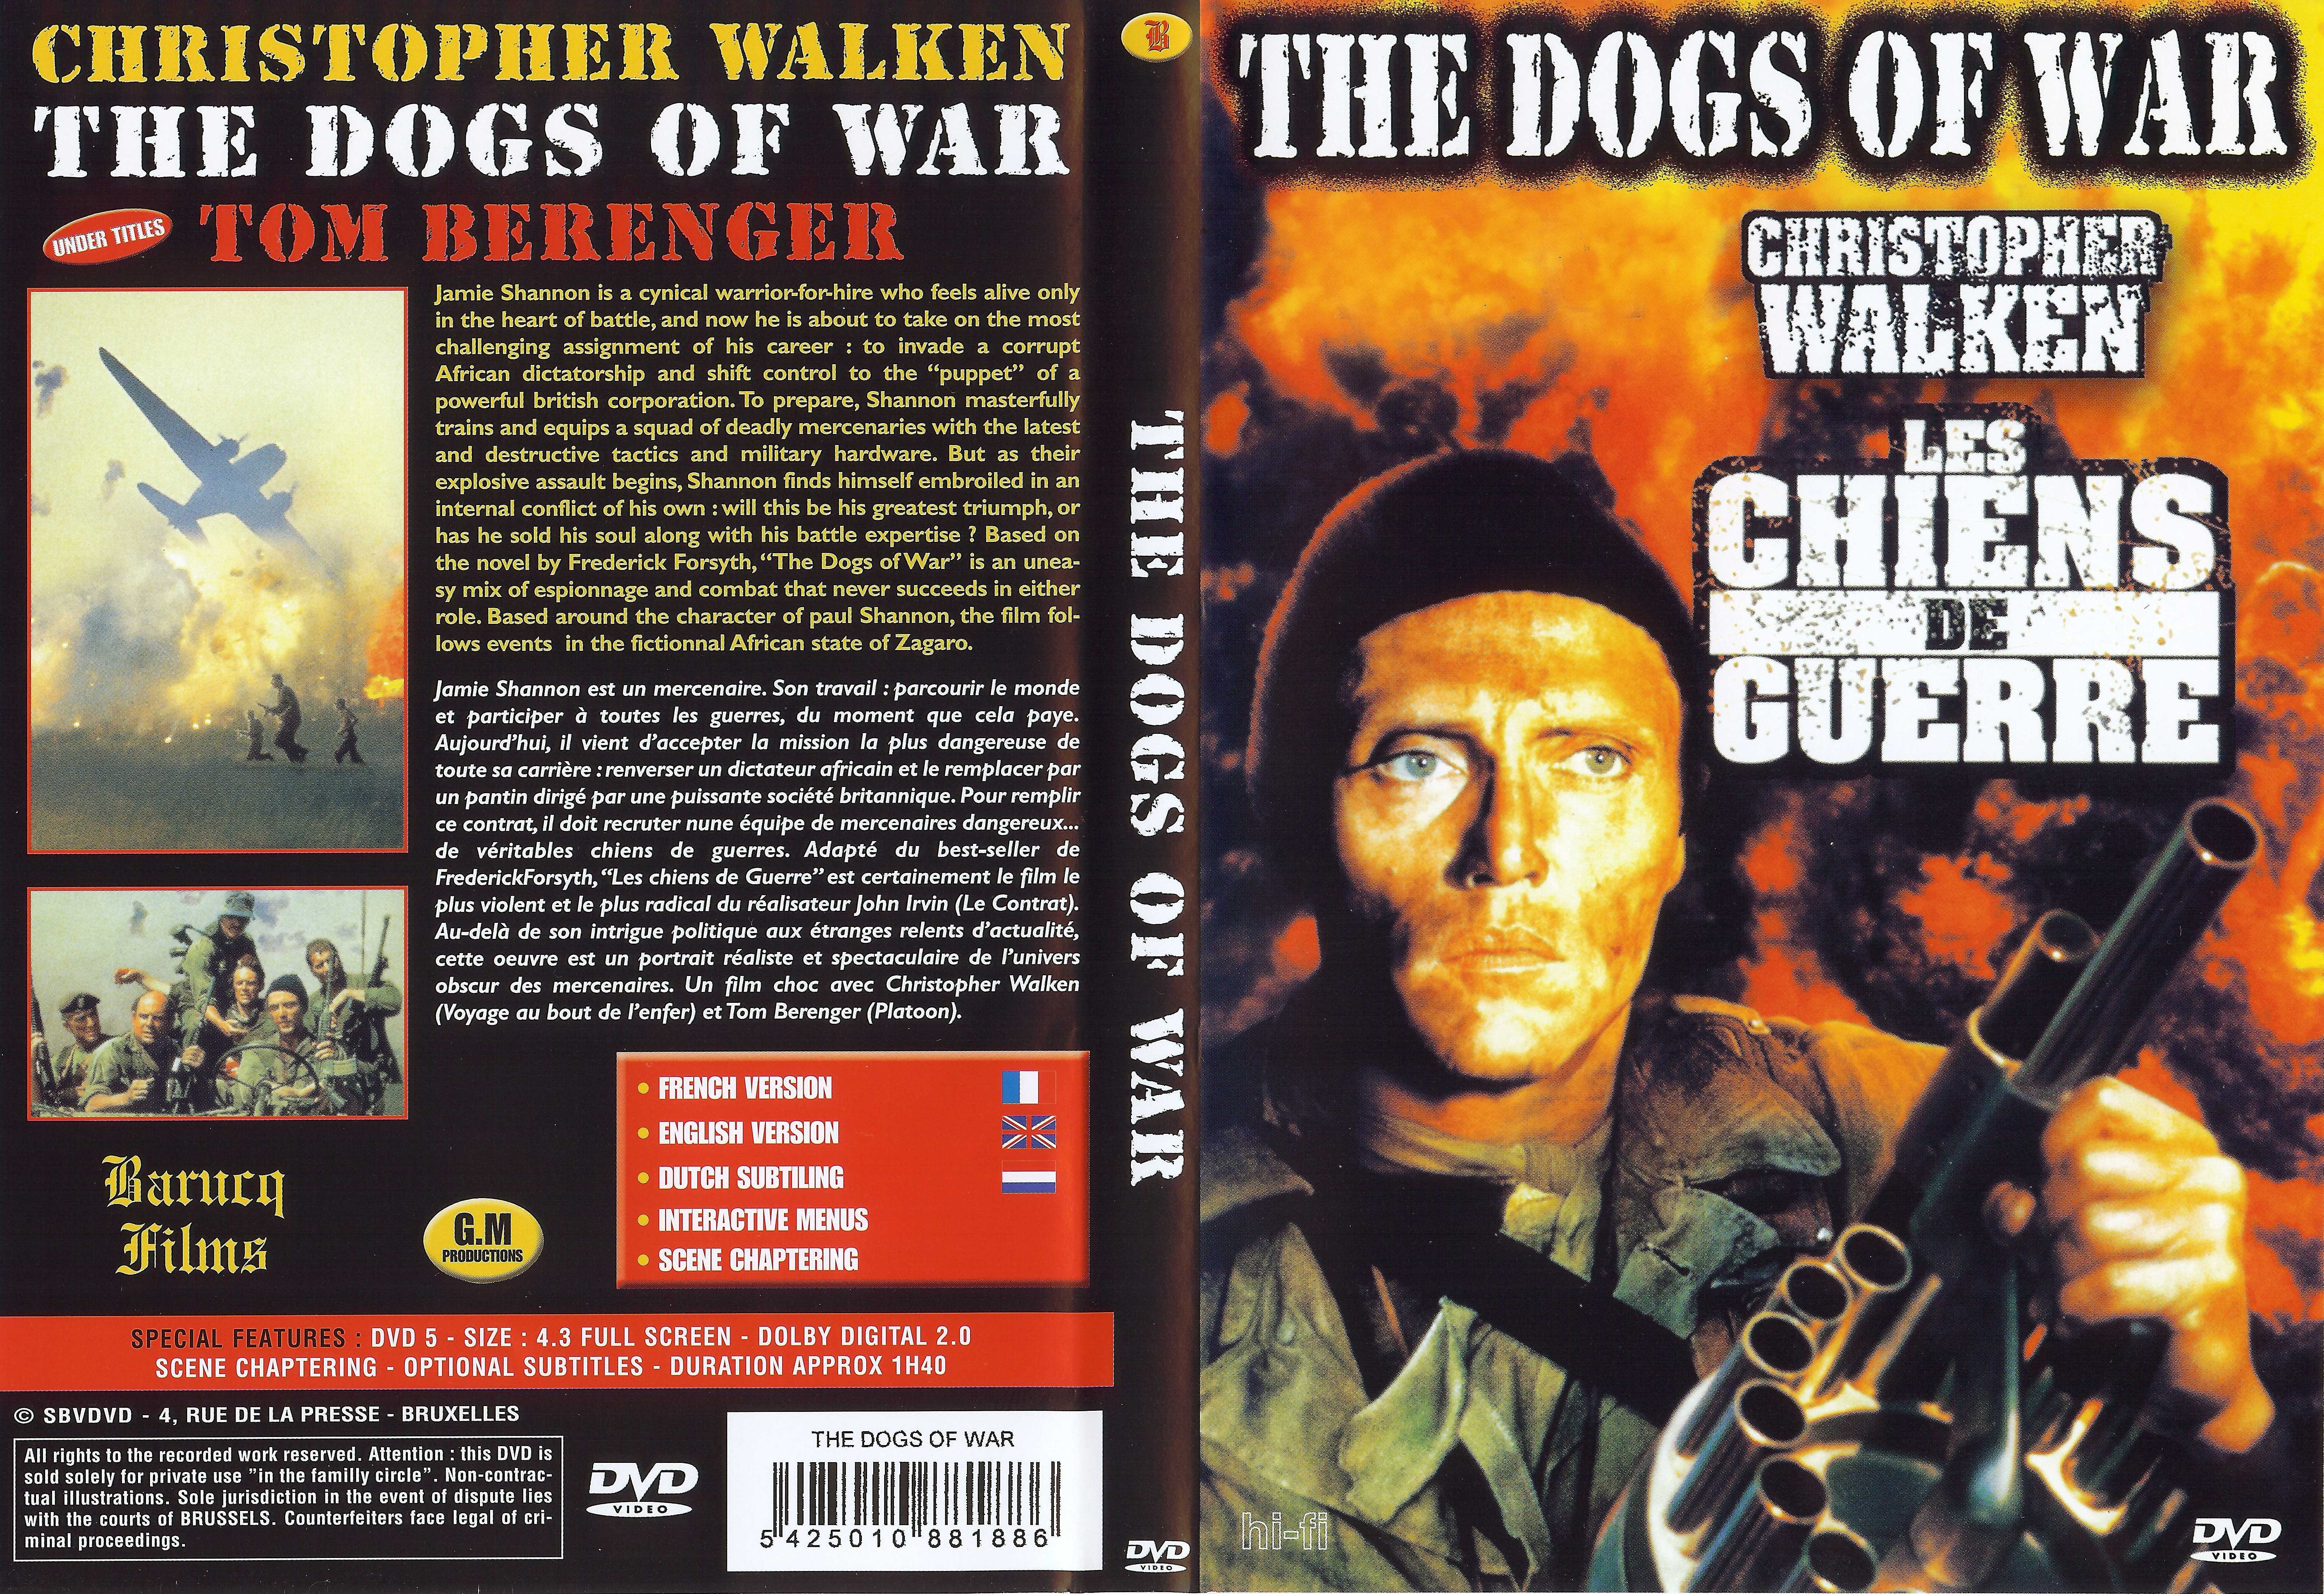 Jaquette DVD The dogs of war